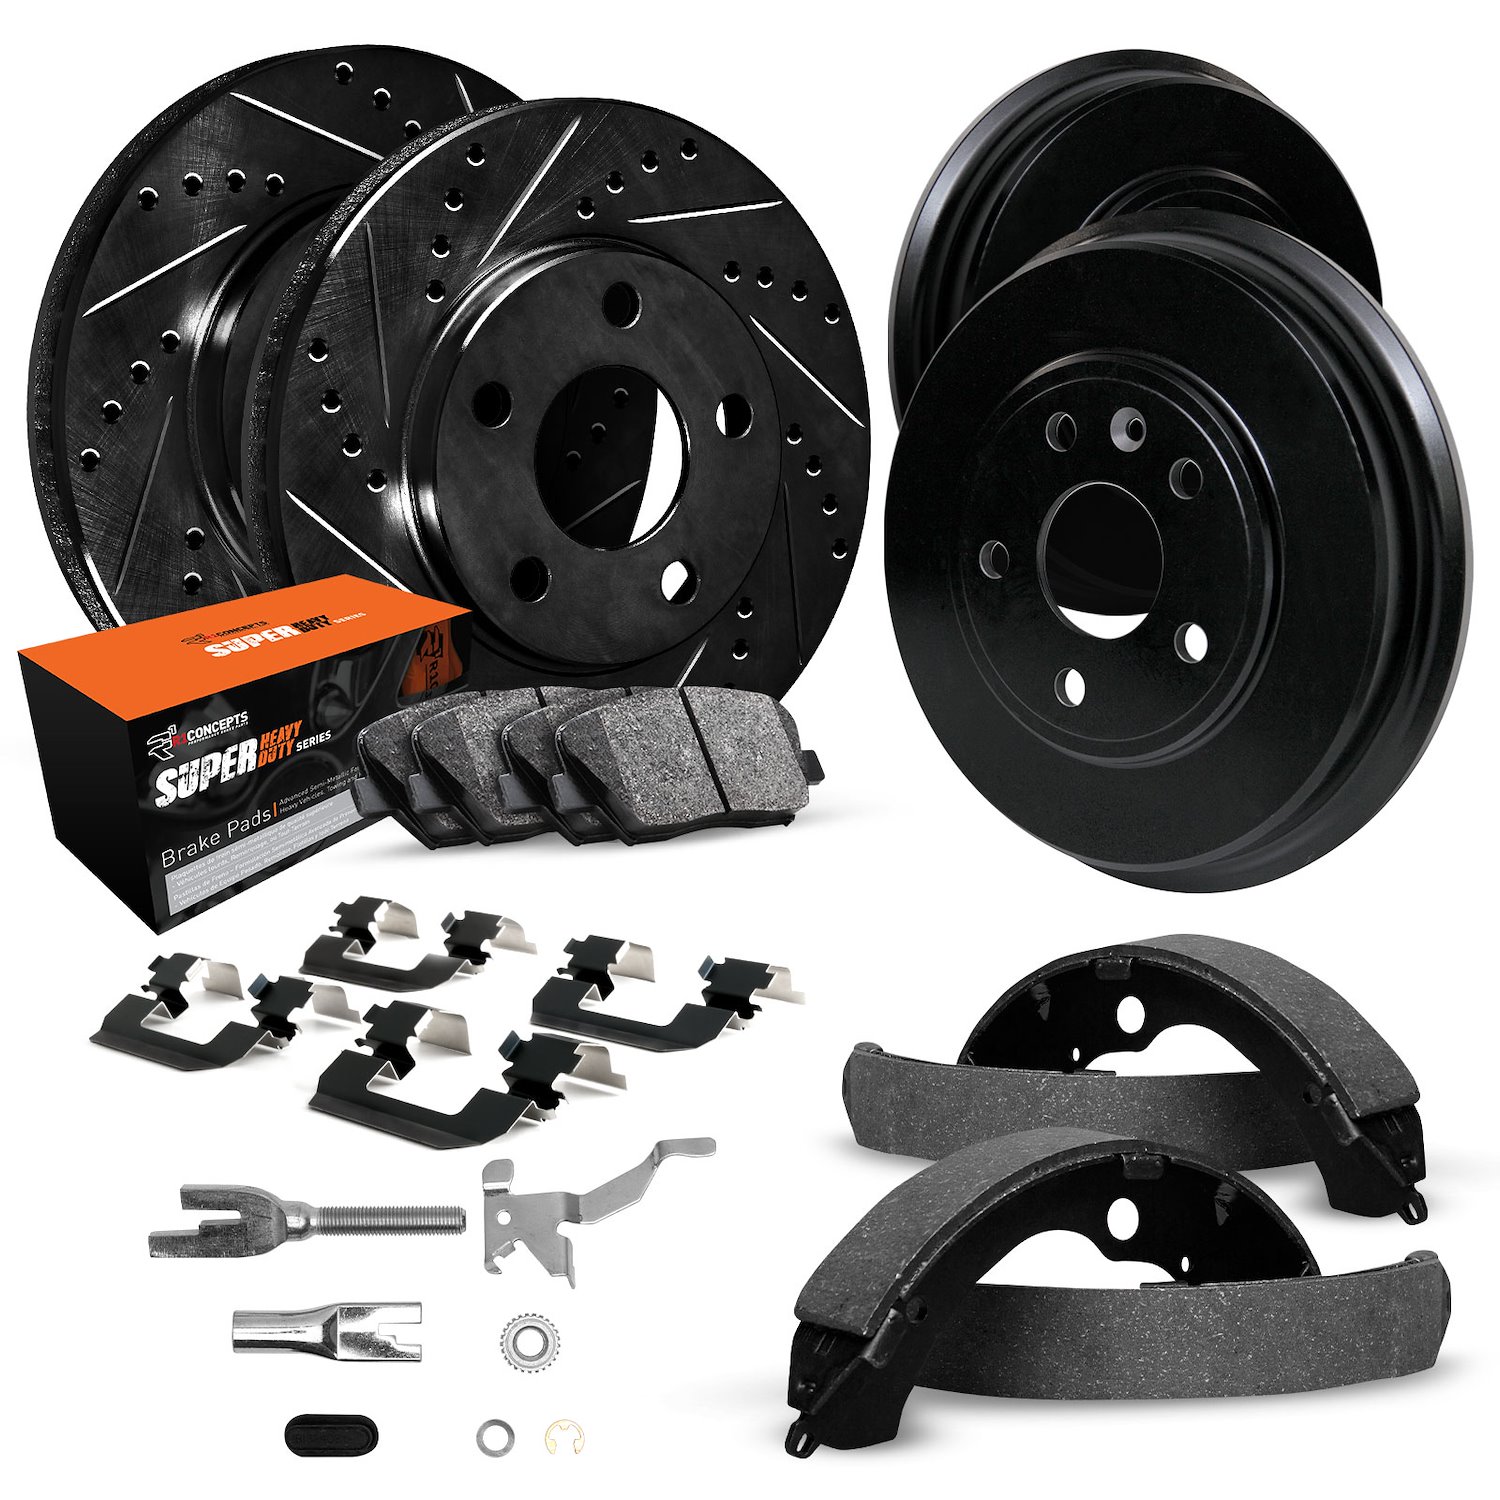 E-Line Drilled/Slotted Black Rotor & Drum Set w/Super-Duty Pads, Shoes, Hardware/Adjusters, 1990-1991 Ford/Lincoln/Mercury/Mazda